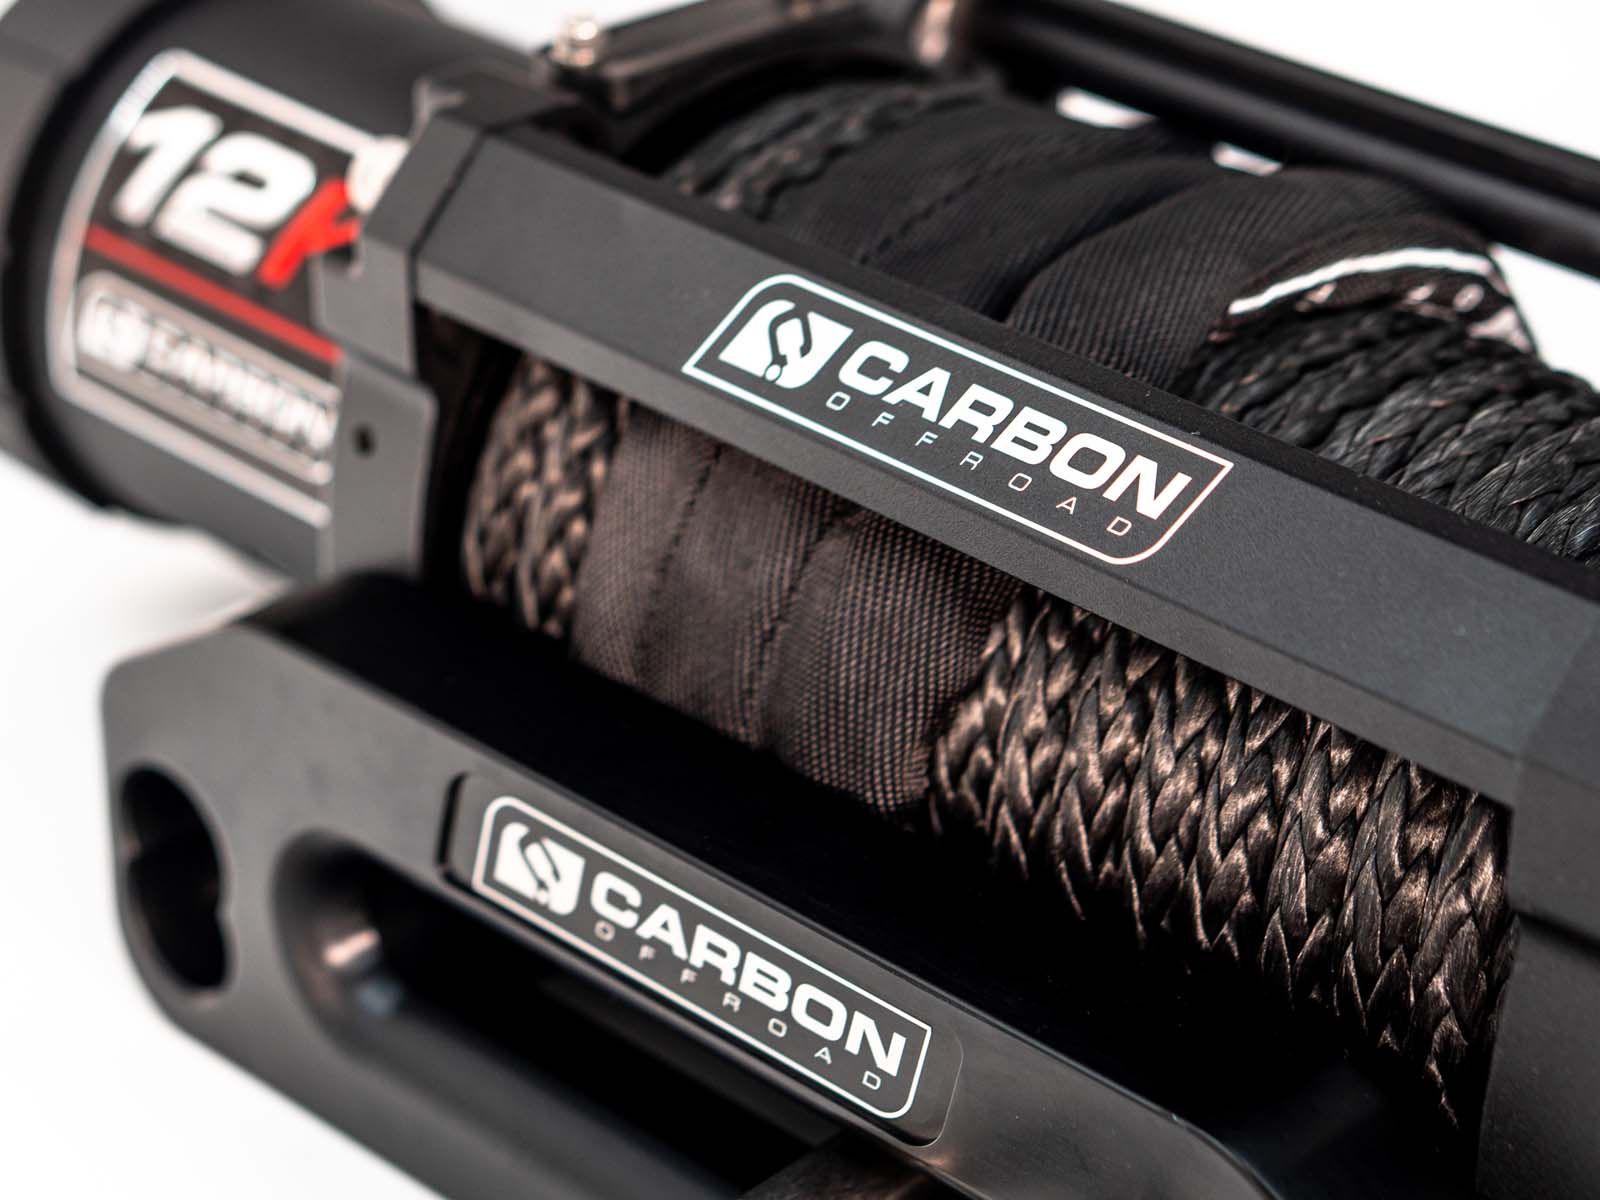 Carbon 12K - 12000lb Winch With Sandy Taupe Hook V3 | Carbon Offroad